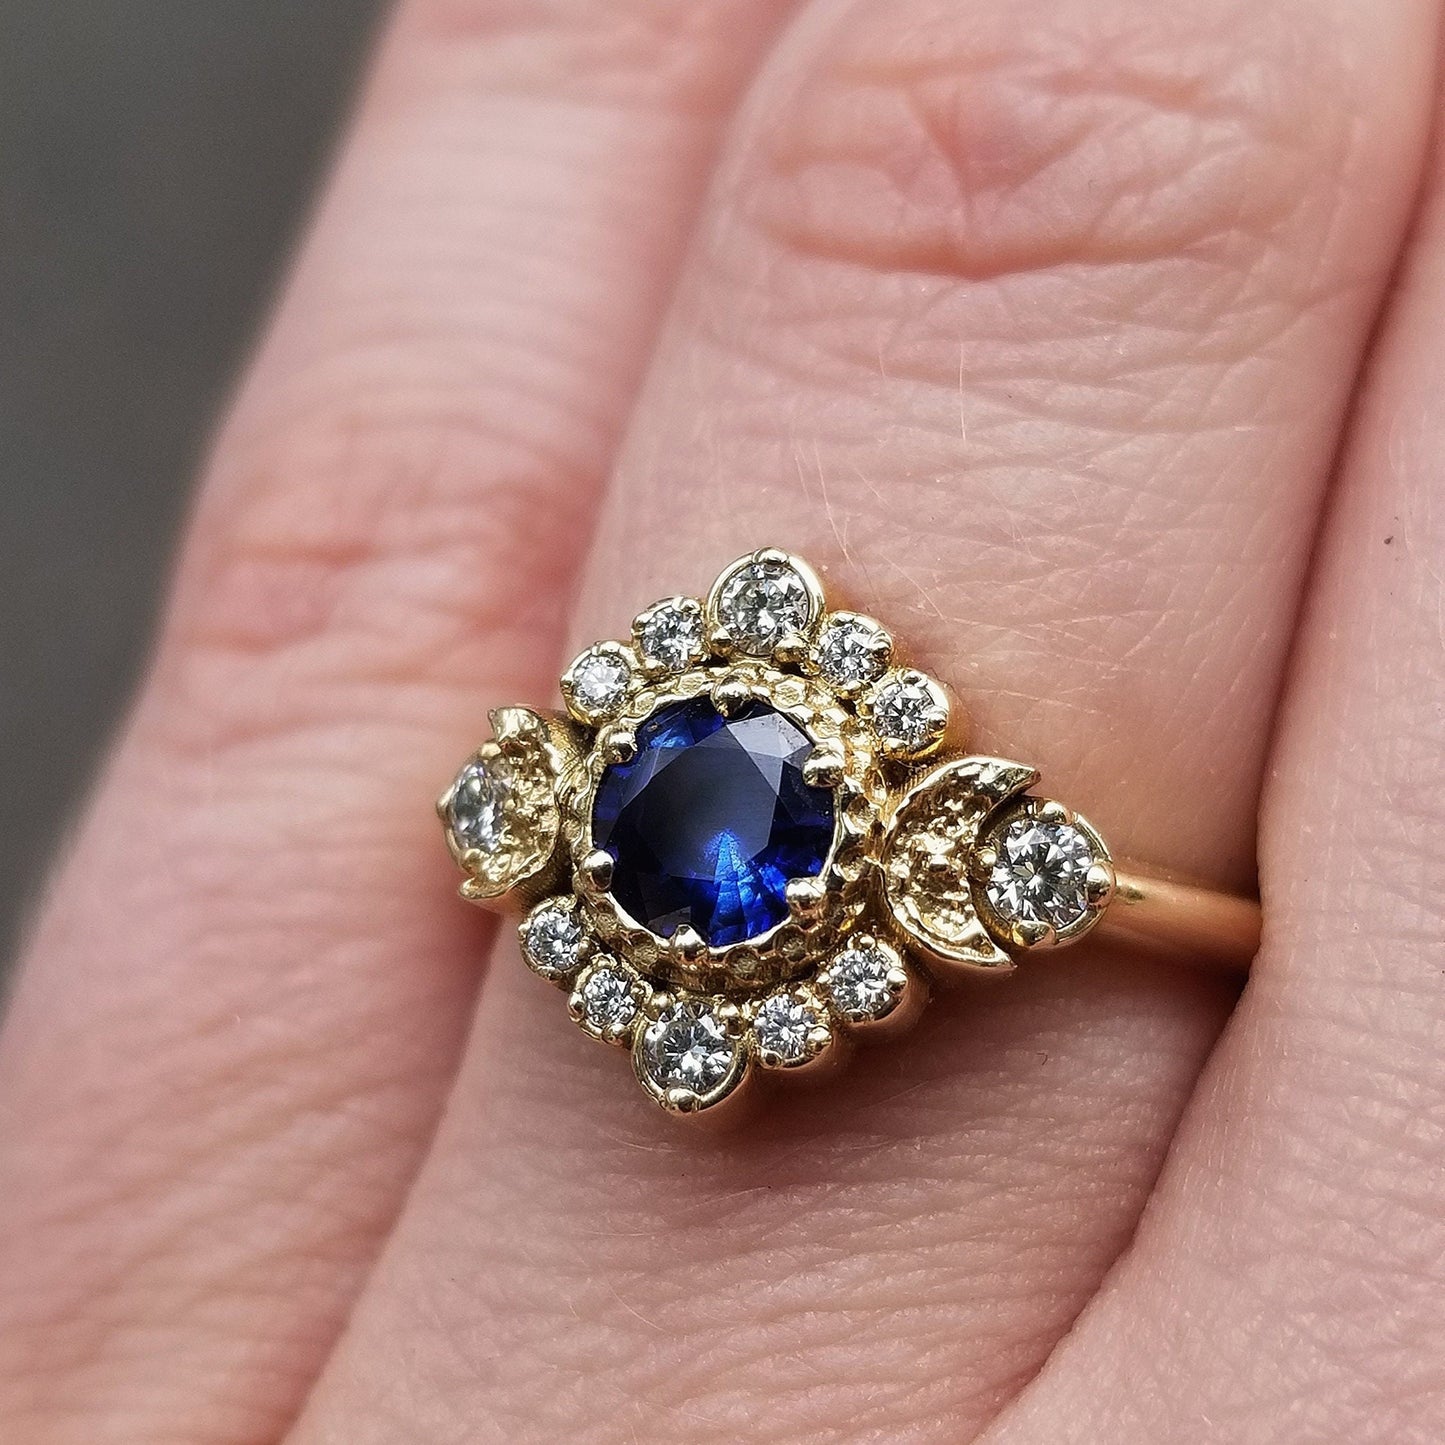 Ready to Ship Size 6 - 8 - Blue Moon Halo Sapphire Engagement Ring Set with Double Chevron Wedding Band - 14k Yellow Gold - Handmade Jewelry